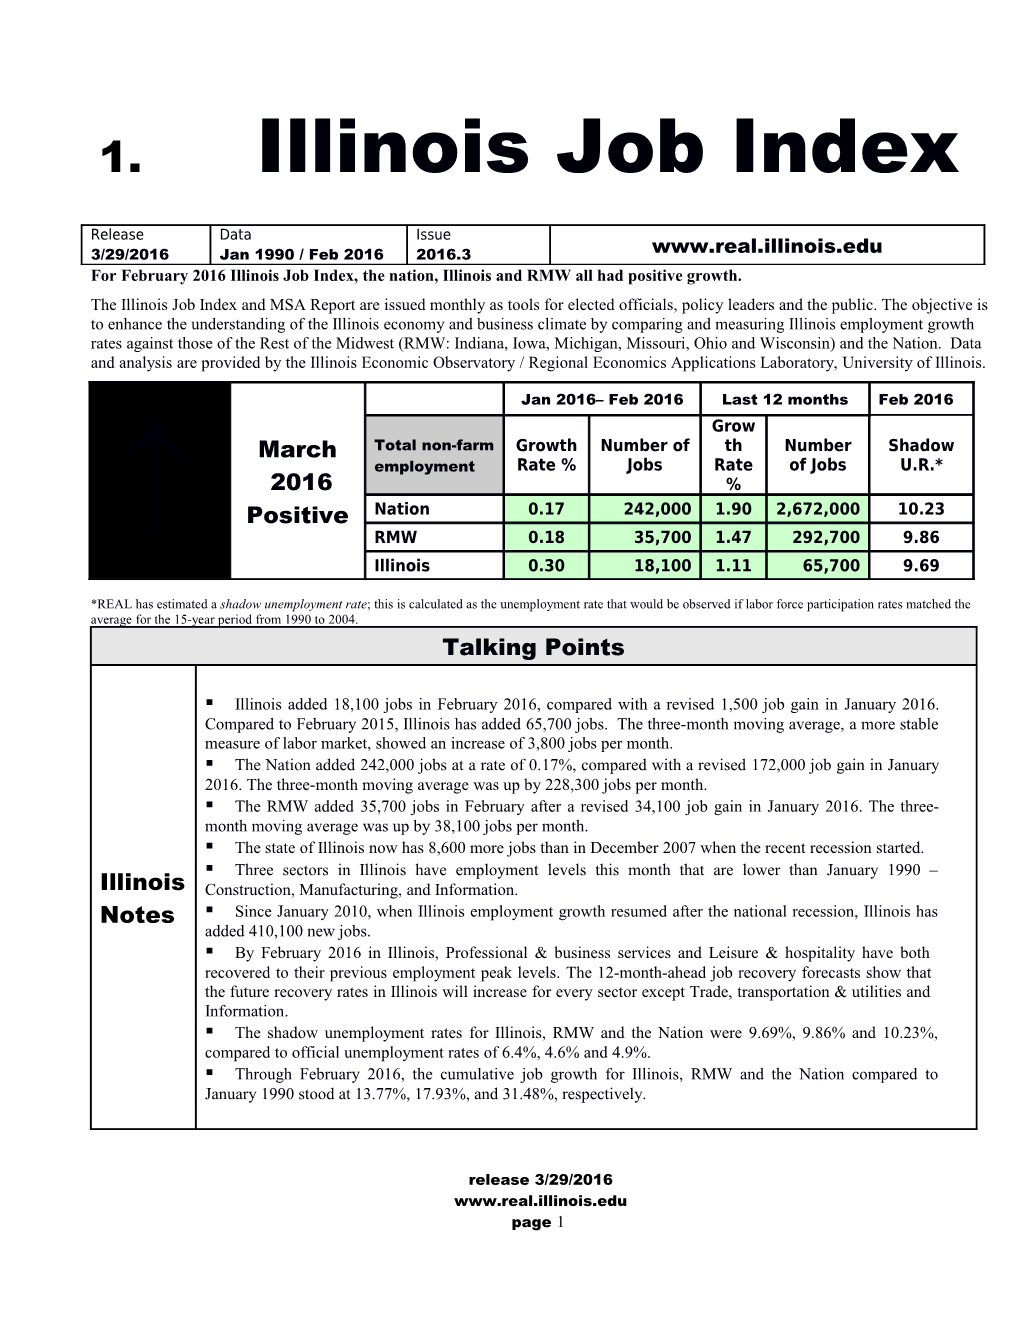 Forfebruary2016illinois Job Index, the Nation, Illinois and Rmwall Had Positive Growth